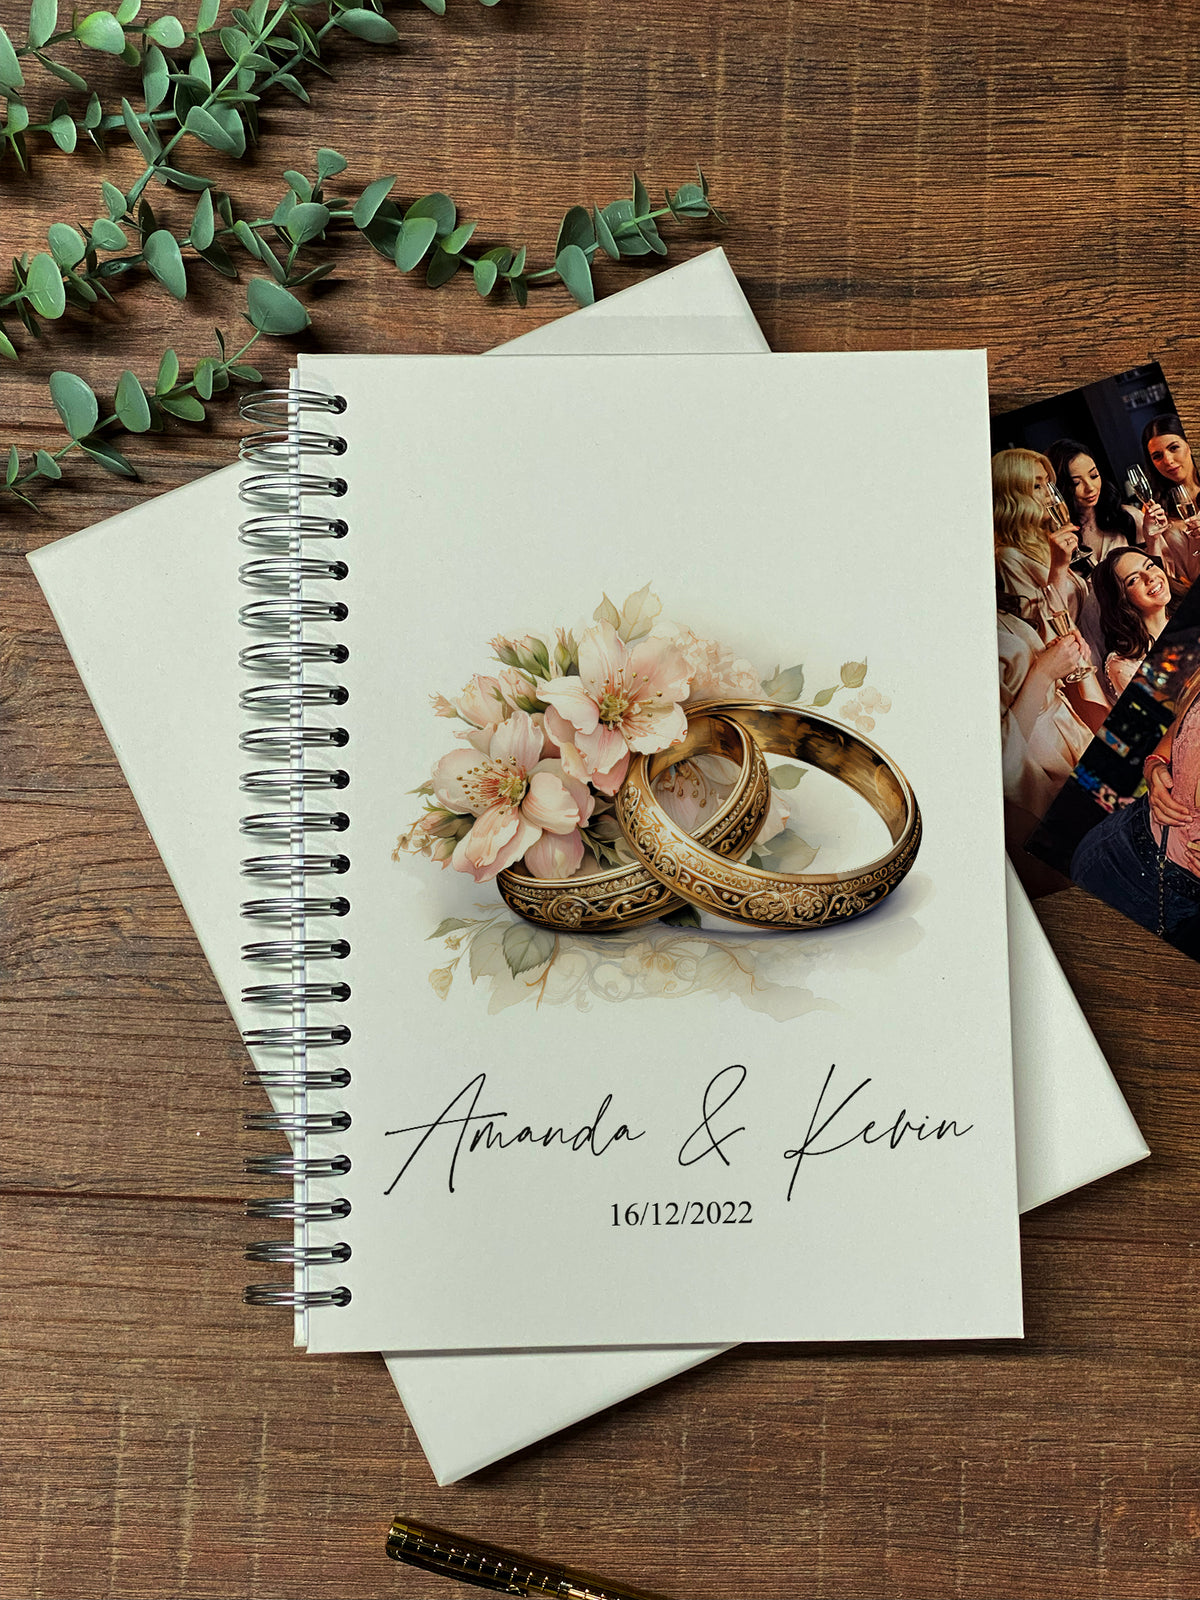 Large A4 Wedding Album Scrapbook Guest Book Boxed With Wedding Rings